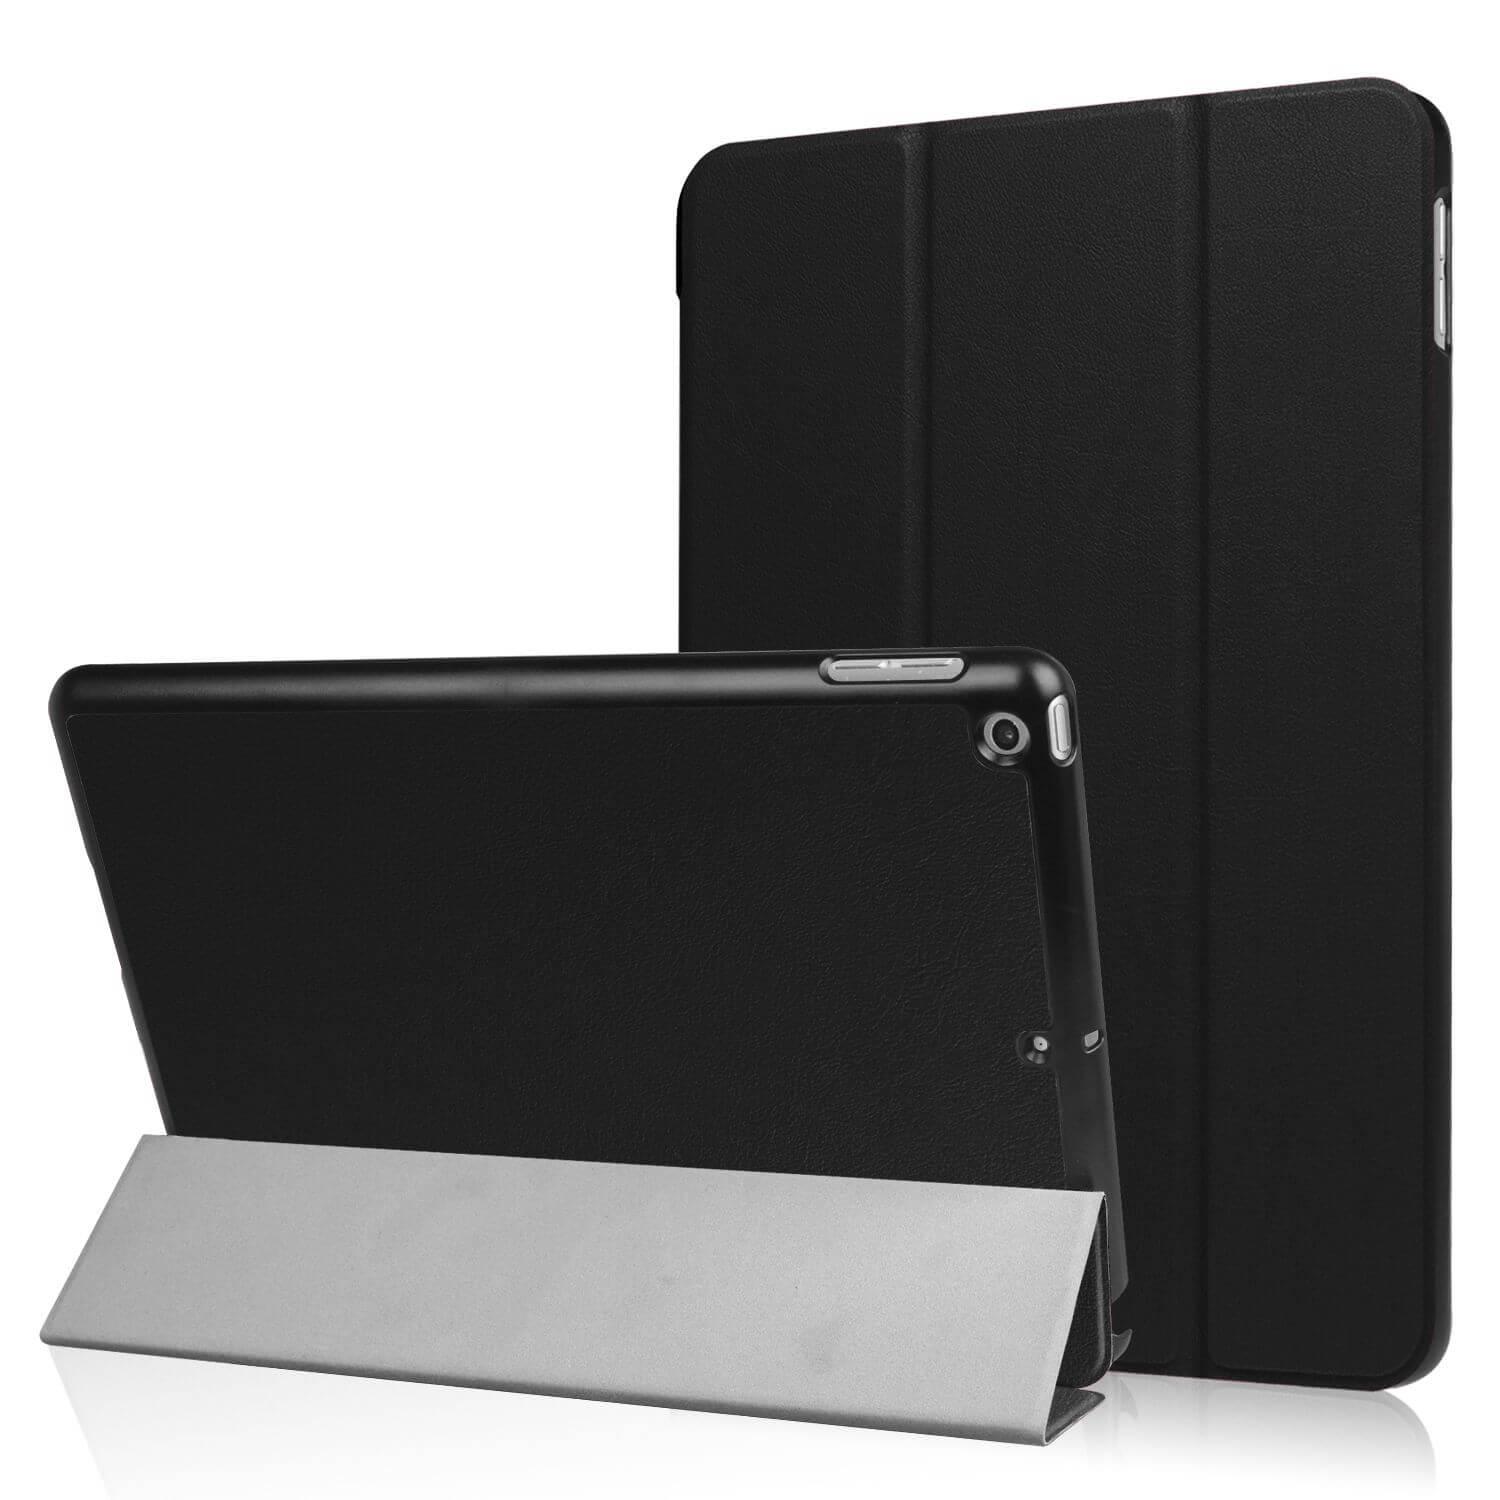 For Apple iPad 9.7 2017 / 2018 Case Smart Trifold Hybrid Cover Black